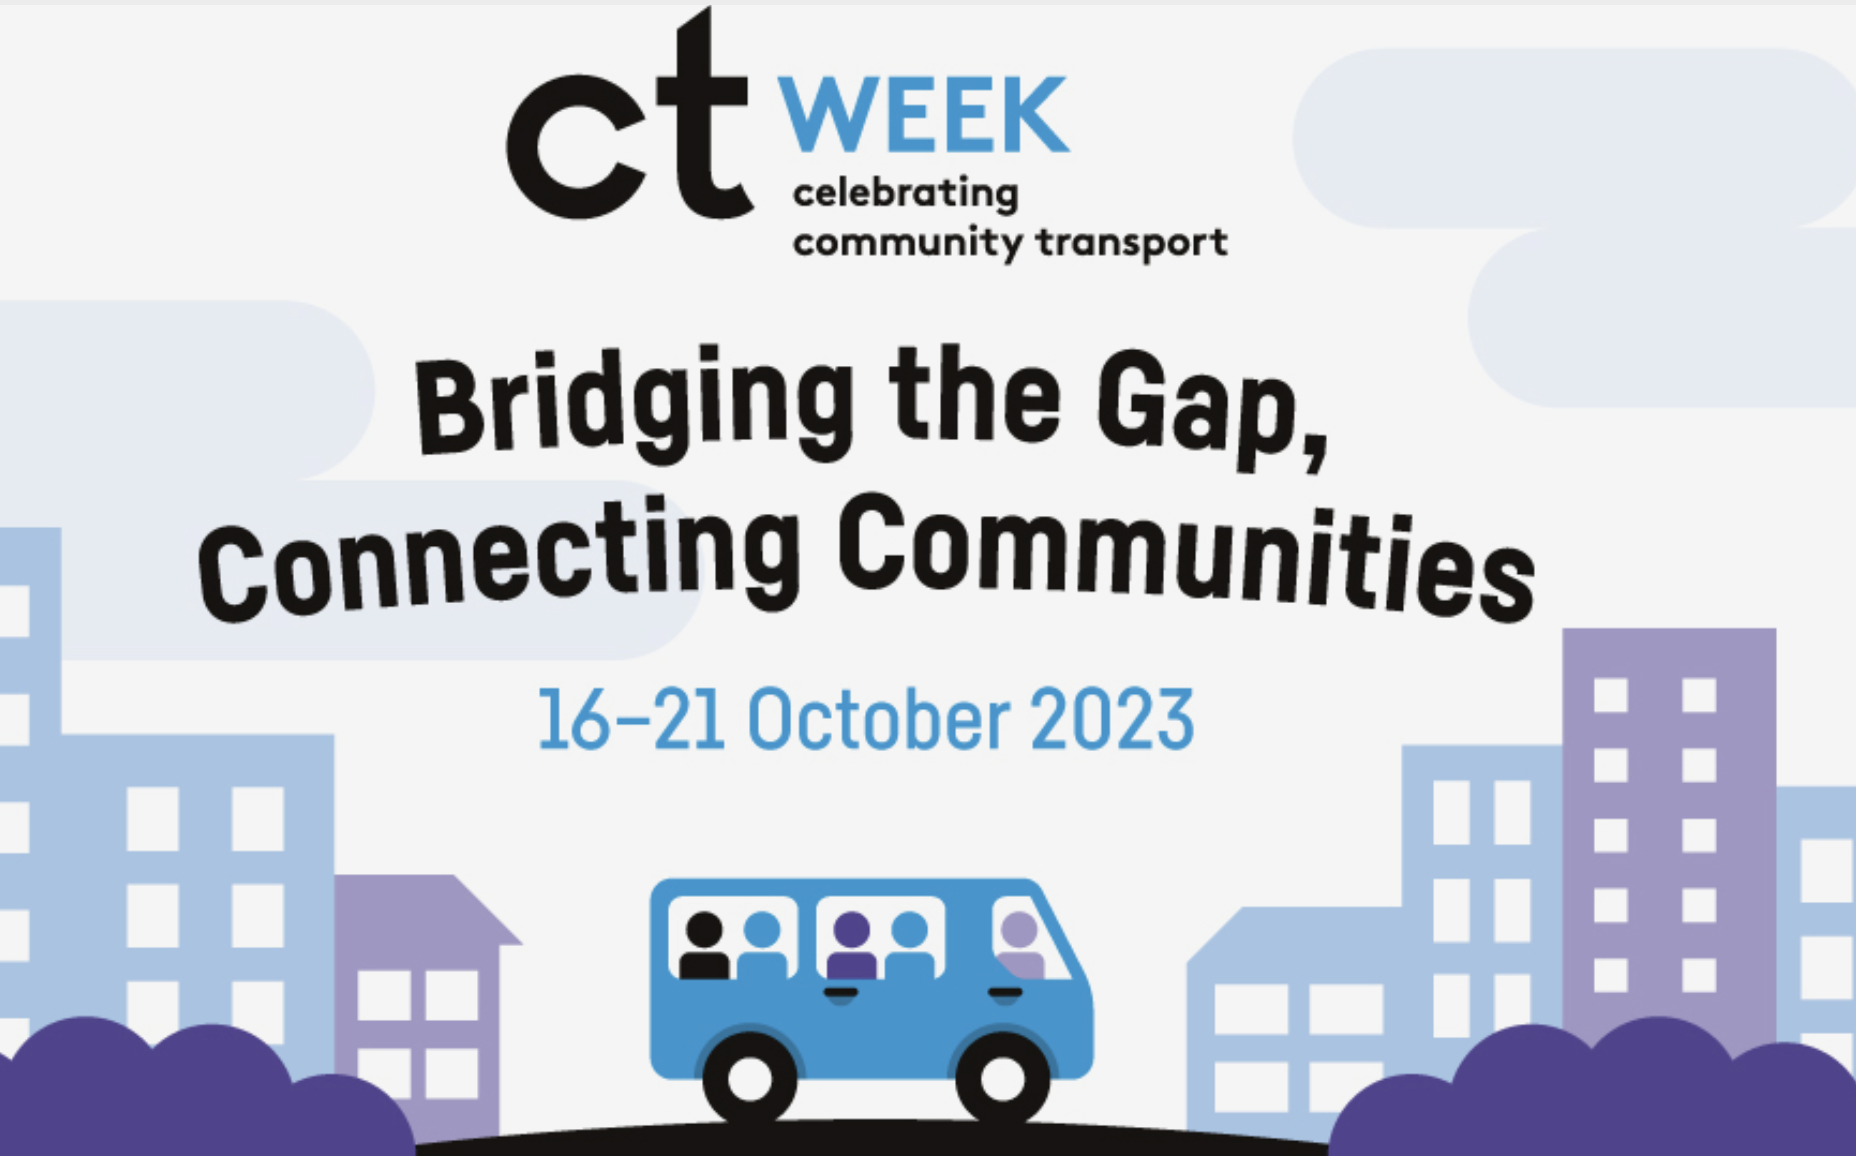 A week-long celebration of the impact of community transport